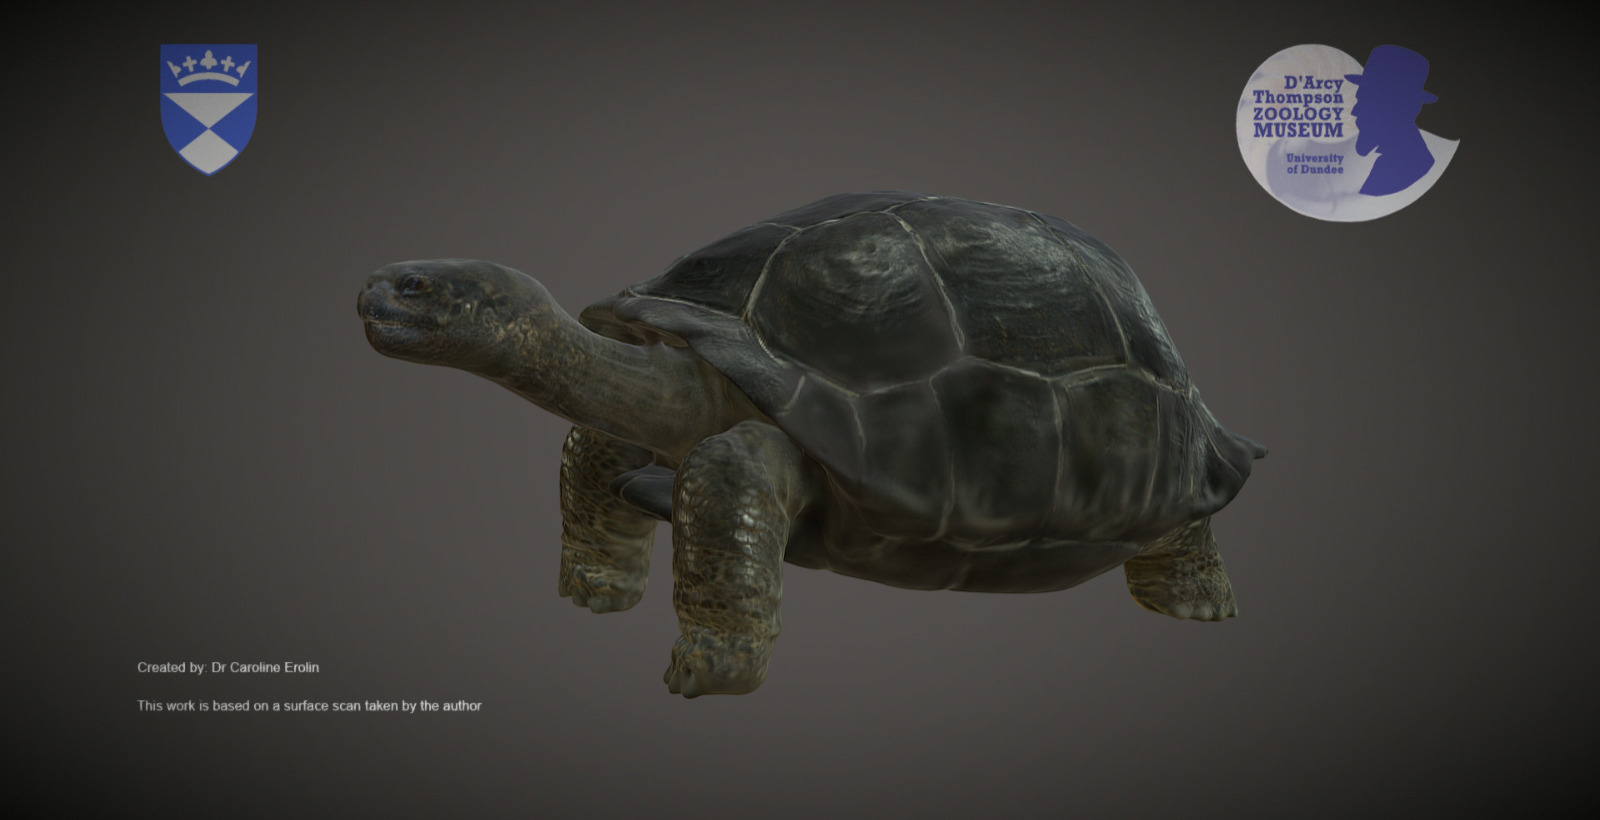 A new version of this model has been uploaded with a more accurate texture.

Surface scan of a Galapagos giant tortoise from the D’Arcy Thompson Zoology Museum at the University of Dundee.

Chelonoidis nigra (originally catalogued as Testudo elephantopus) - Galapagos Giant Tortoise. Length = 82cm.

Scanned with an Artec Eva surface scanner. The resulting file is exported as an obj. and imported into Zbrush. Texture is added from photographs using the Spotlight function and Polypainting.

We’d love to hear from you if you download or print our models, especially if you use them in education and outreach 3d model